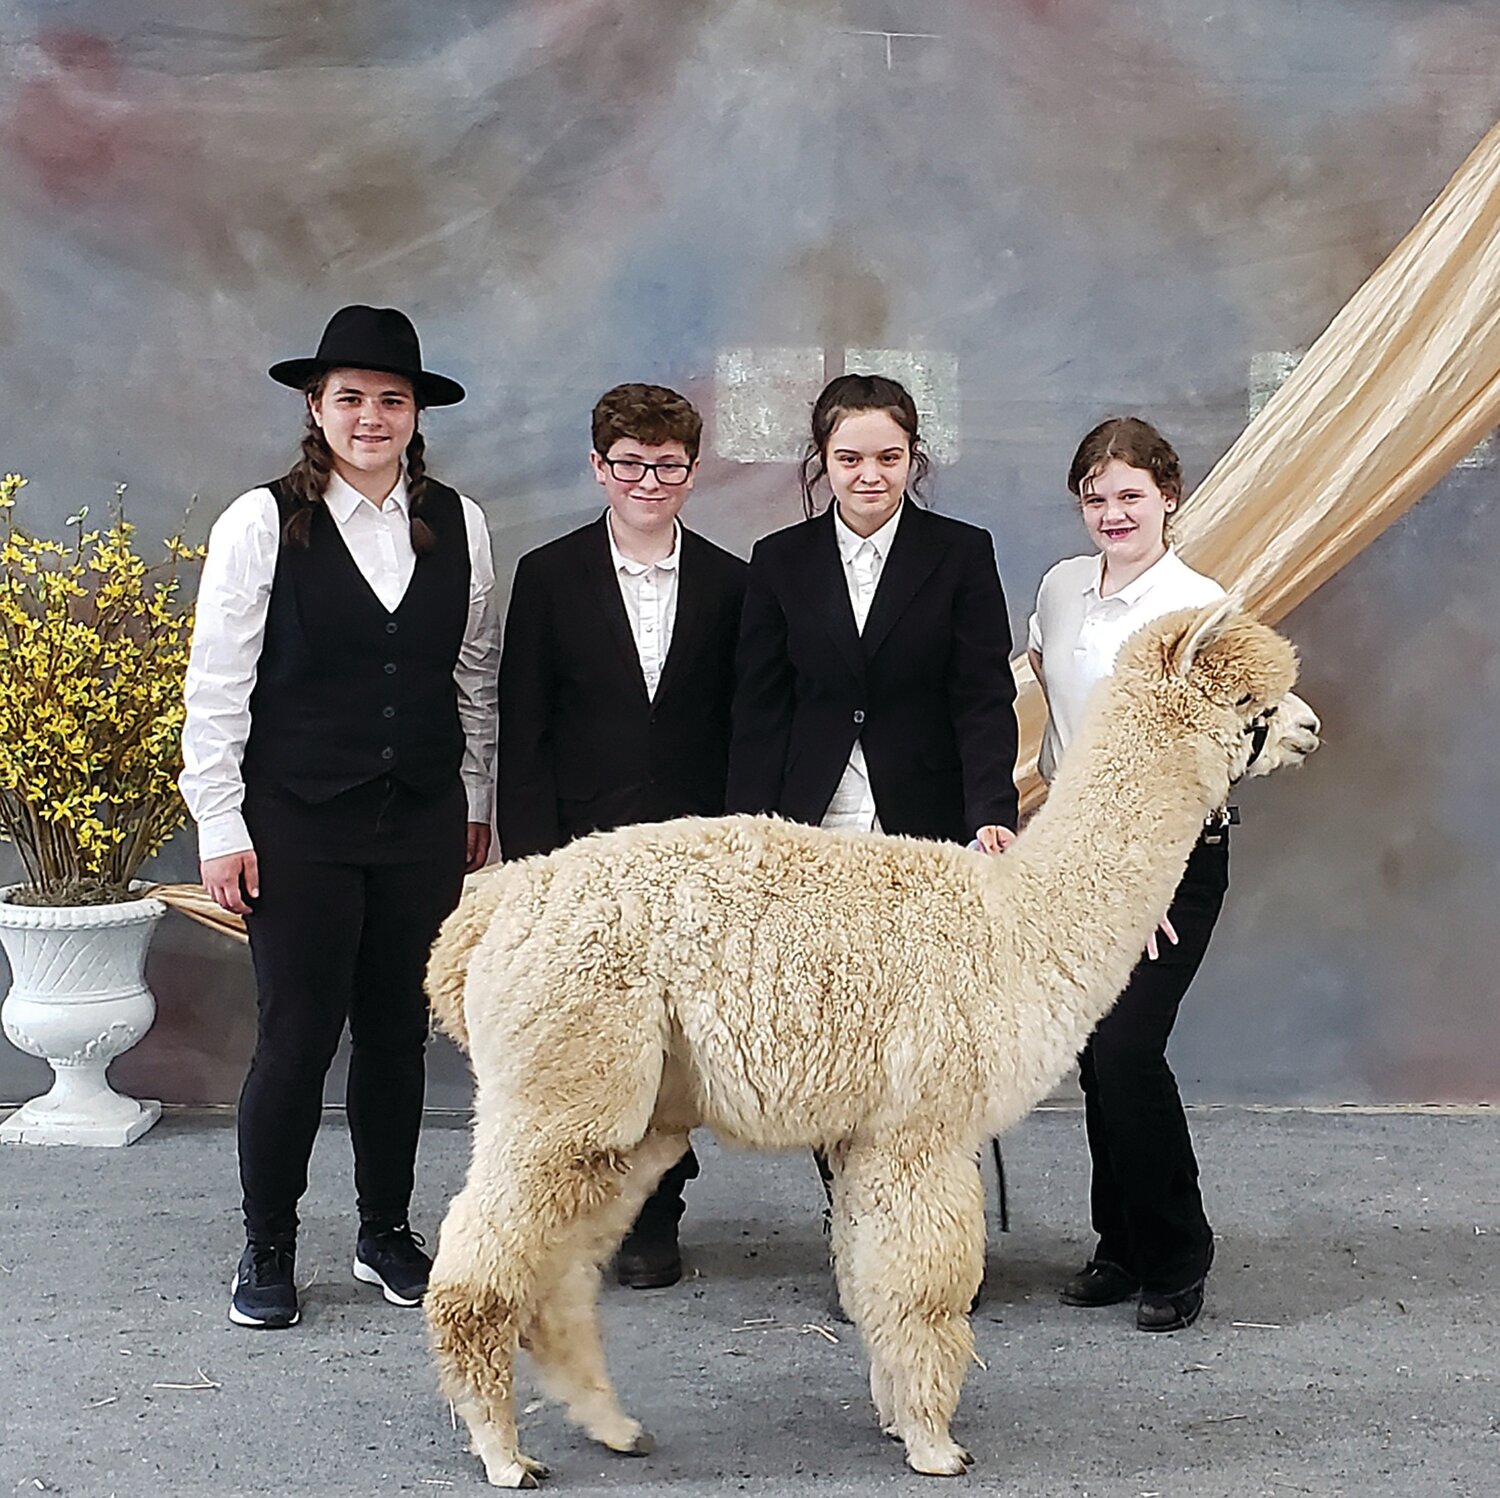 At the Mid-Atlantic Alpaca Association Jubilee are, from left, Bryce Snyder, David Dutertre, Layla Cotter and Amelia Sperling with Laramie the alpaca.